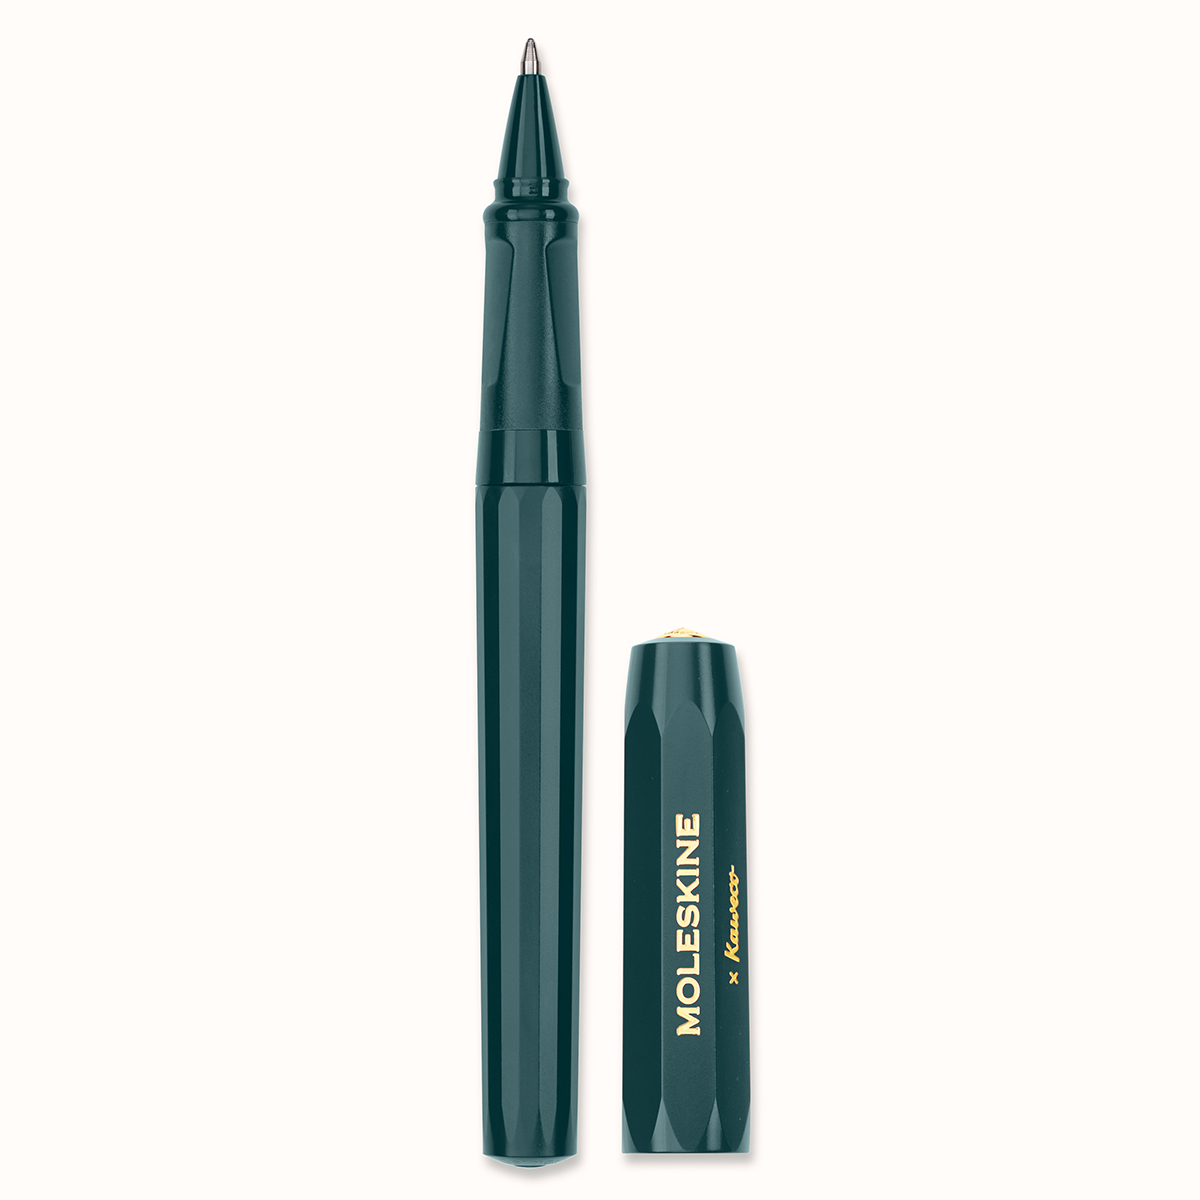 Kaweco x Moleskine Ballpoint Green in the group Pens / Fine Writing / Ballpoint Pens at Pen Store (128877)